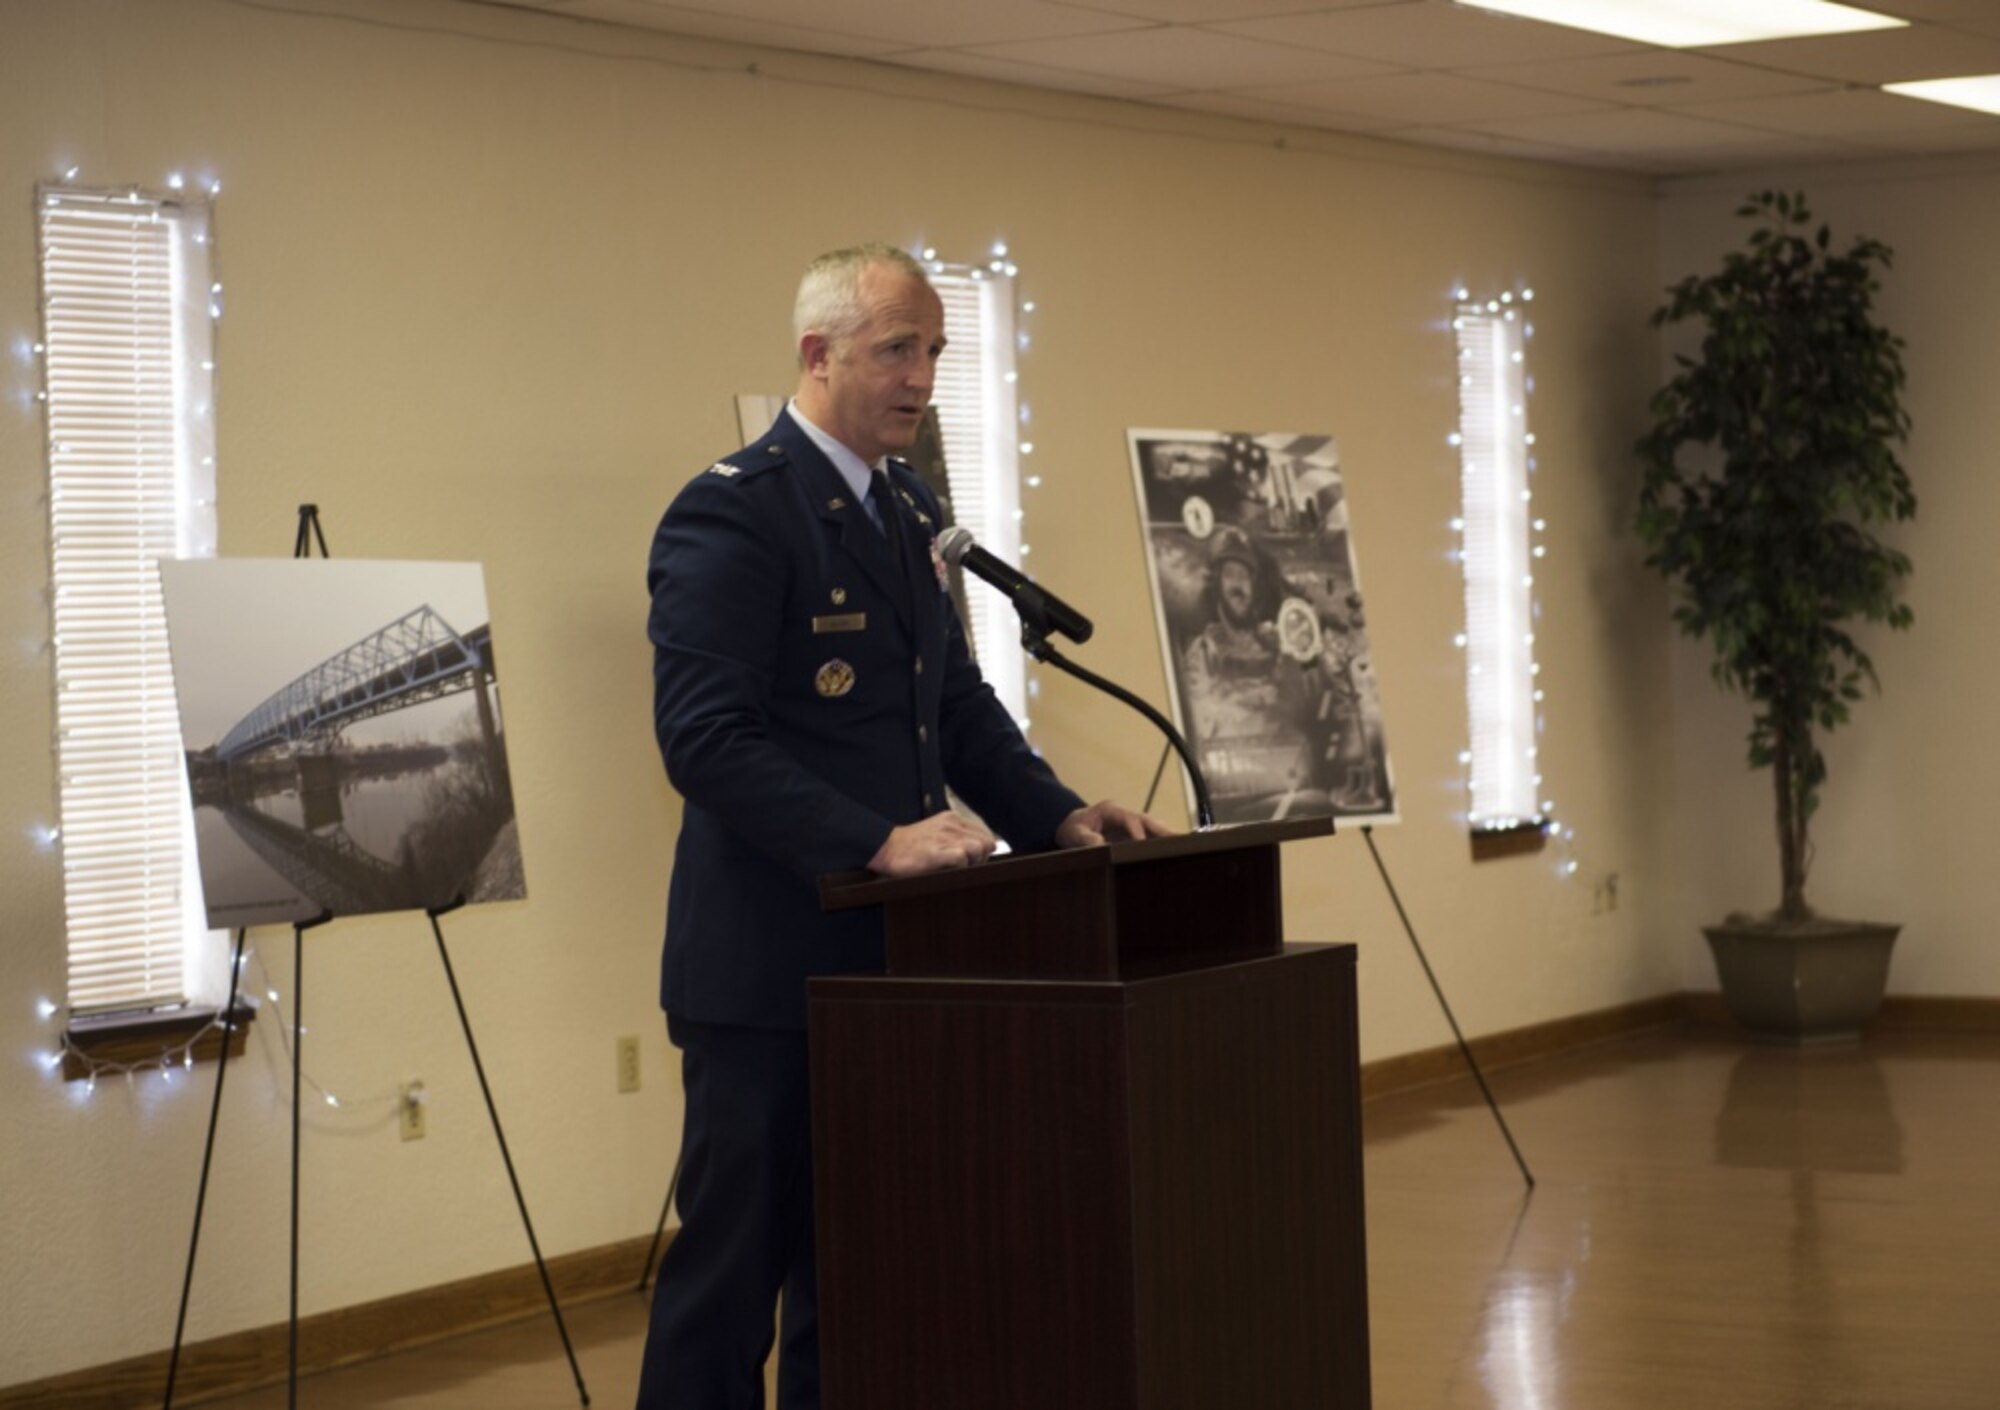 U.S. Air Force Col. Matt Allen, commander of the 24th Special Operations Wing, speaks at a ceremony unveiling the newly named “USAF Combat Controller Staff Sgt. Dylan Elchin Memorial Bridge” in Rochester, Pa. Feb 29, 2020. Elchin was killed alongside two U.S. Army Special Forces members when their vehicle struck an improvised explosive device in Ghazni Province, Afghanistan, Nov. 27, 2018.